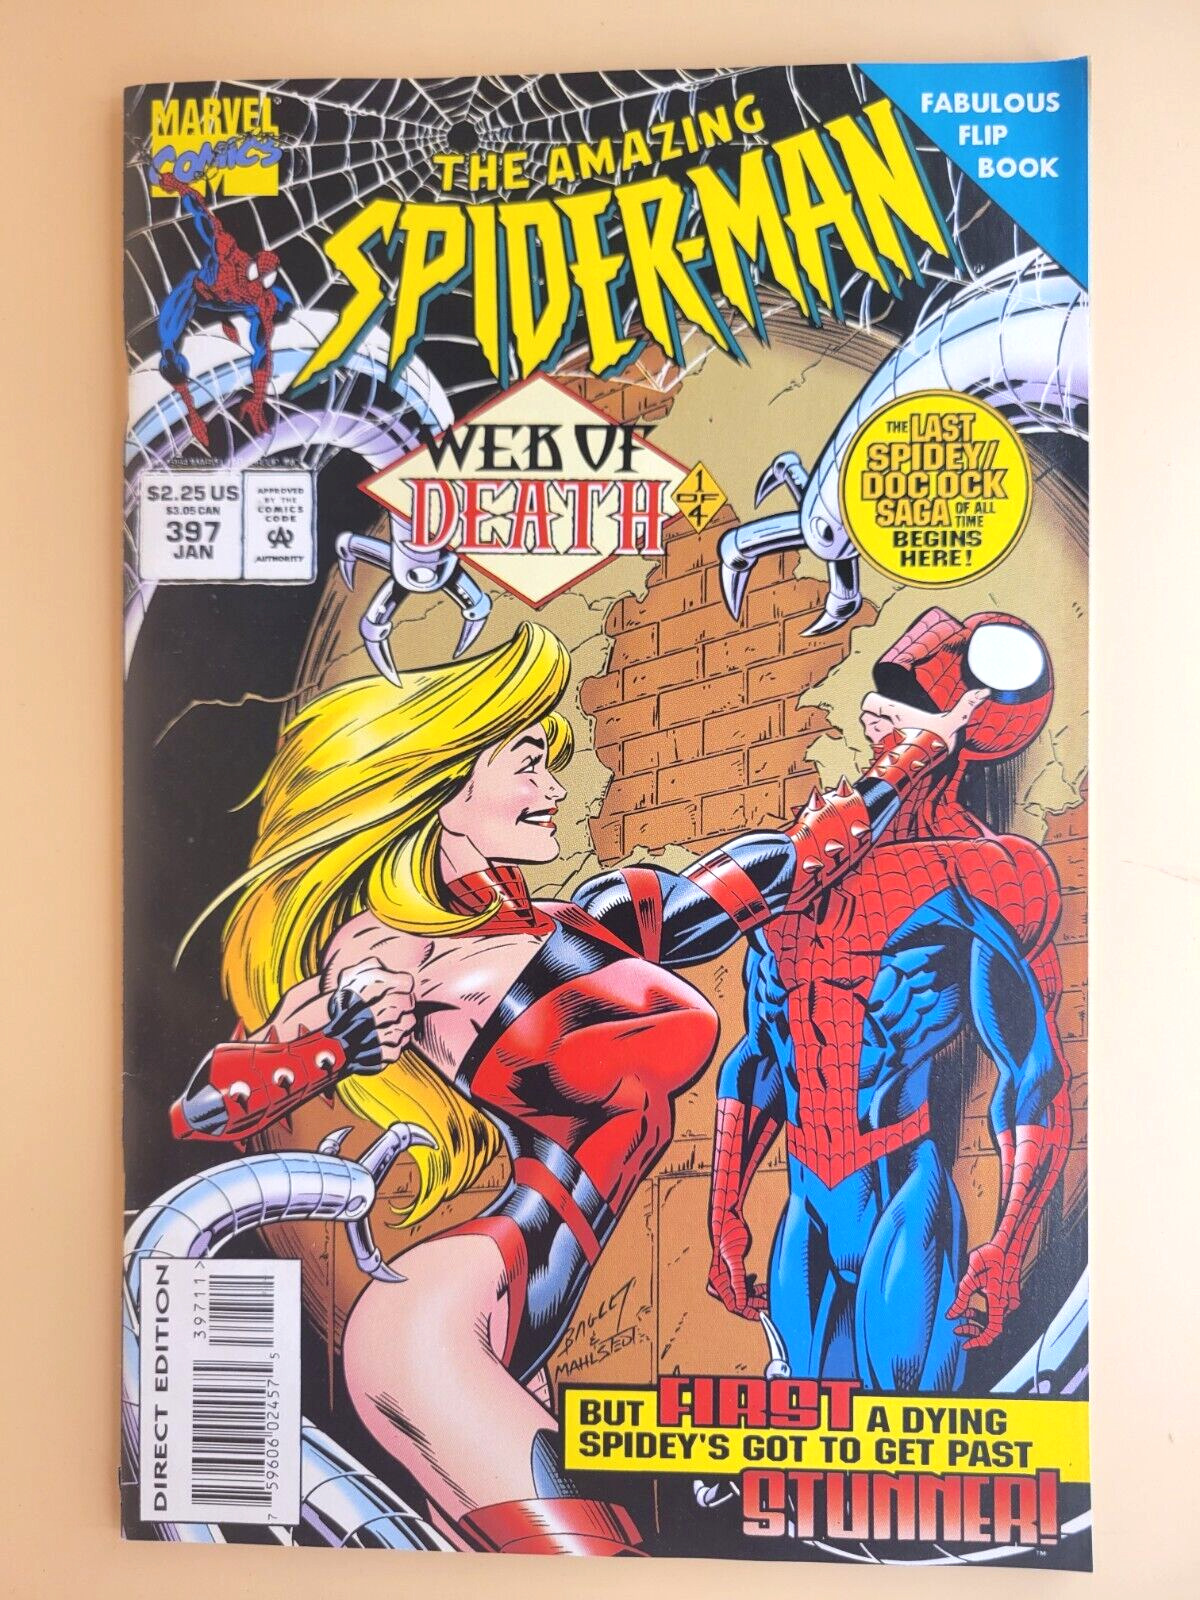 THE AMAZING SPIDER-MAN  #397  VF      COMBINE SHIPPING   BX2405